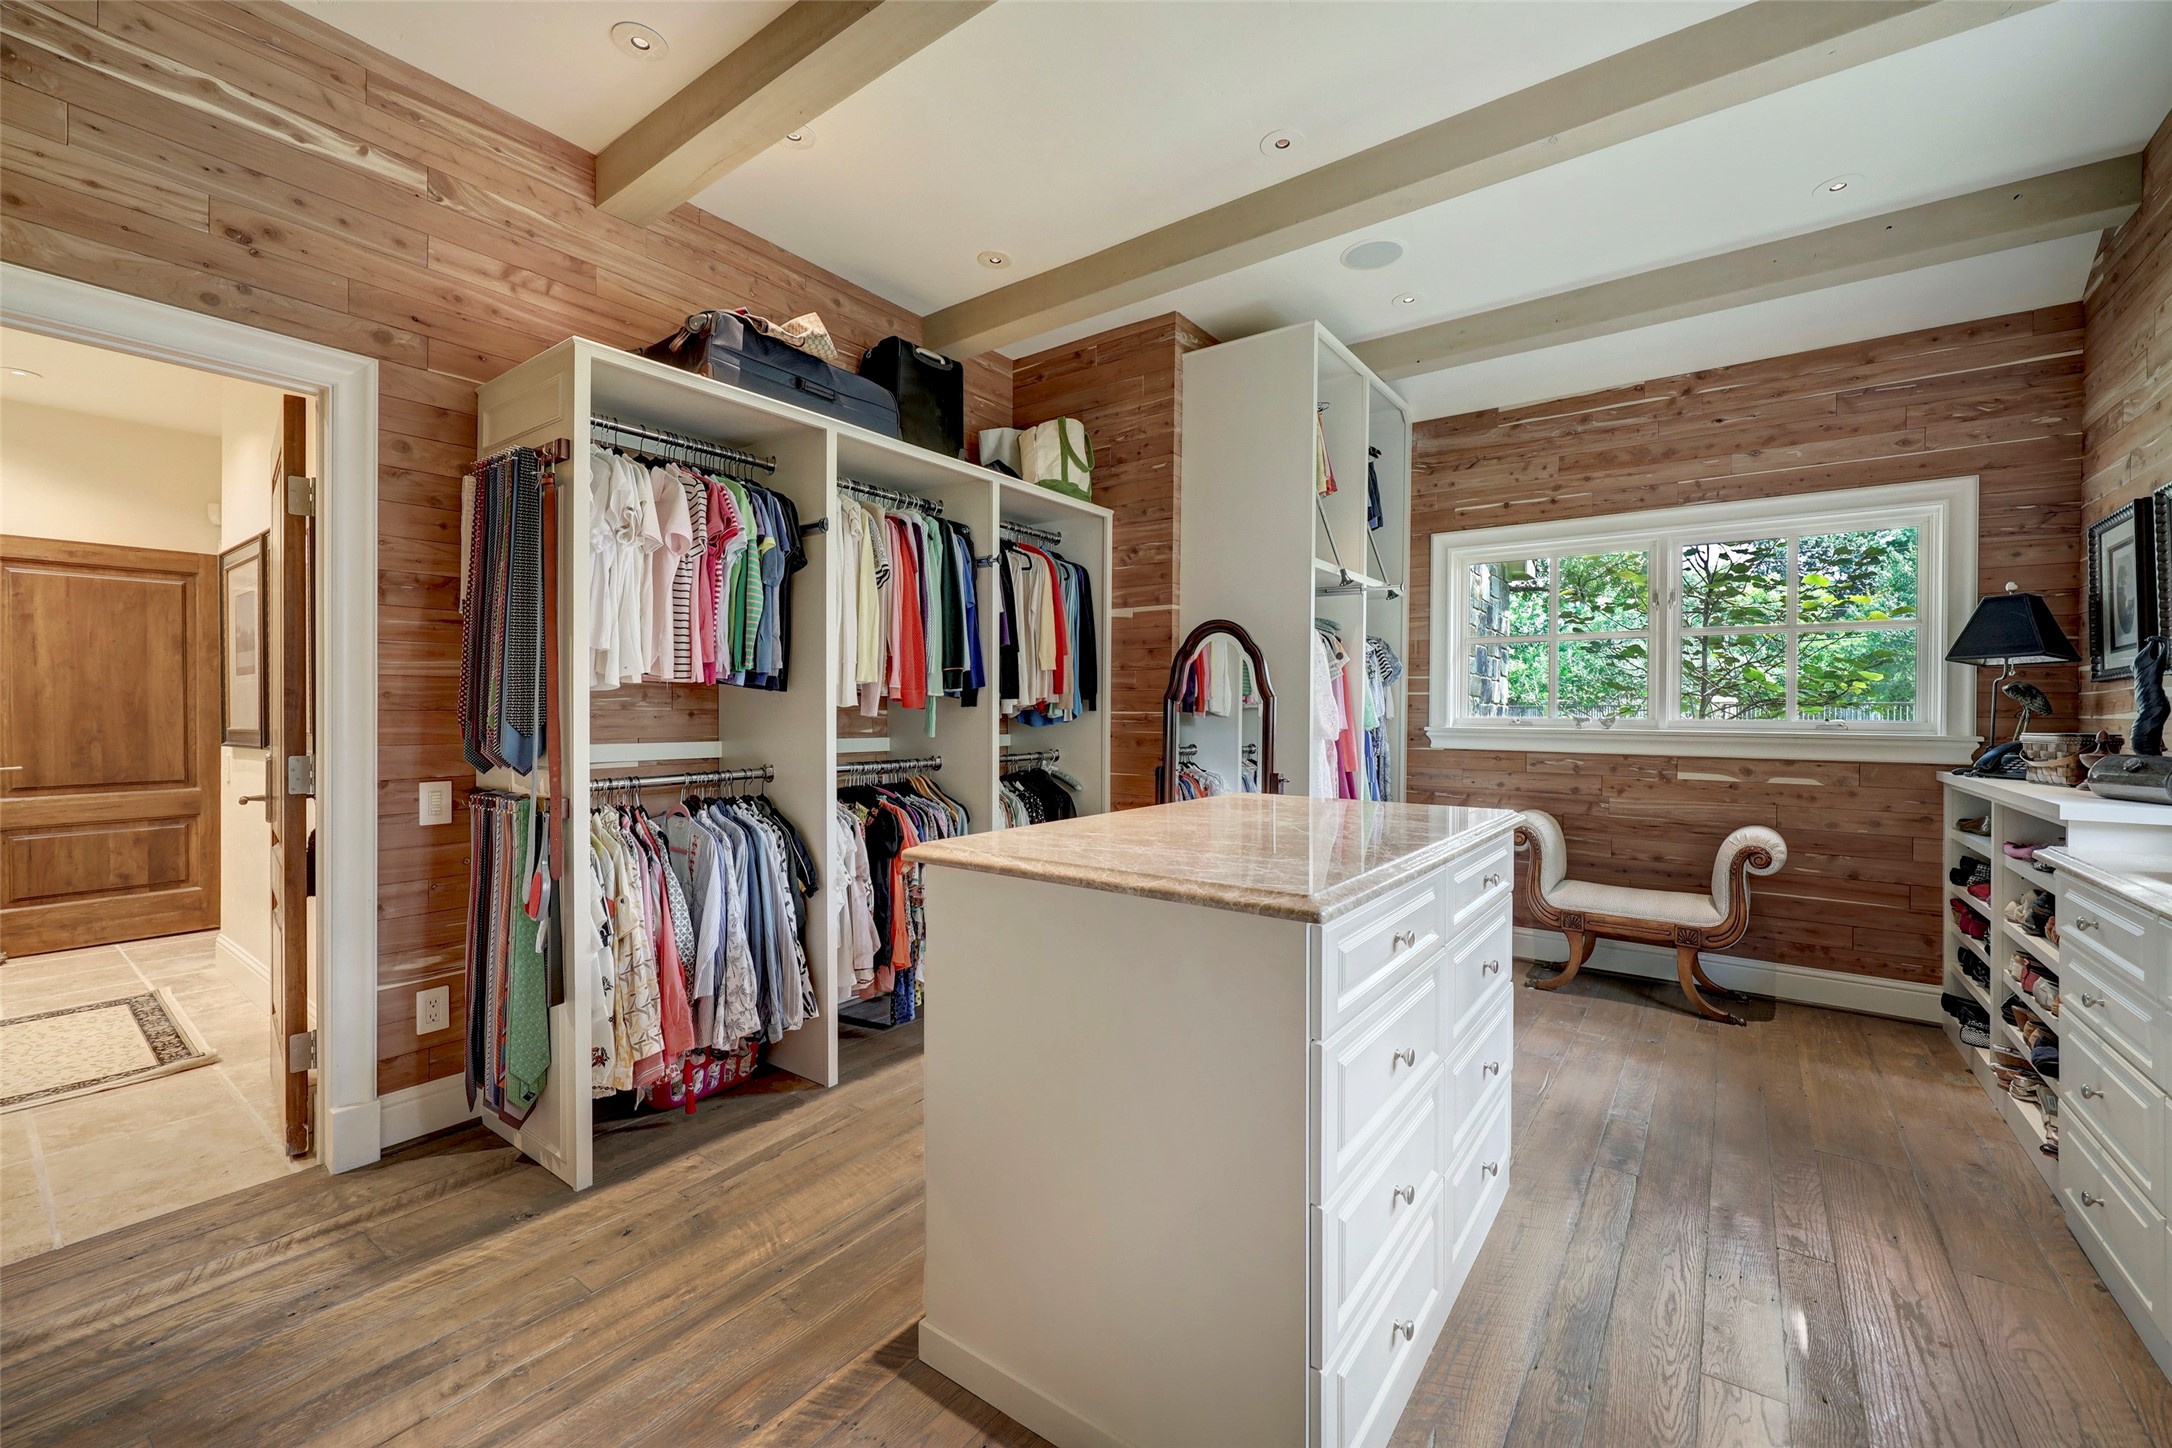 Second primary closet with cedar lined walls!